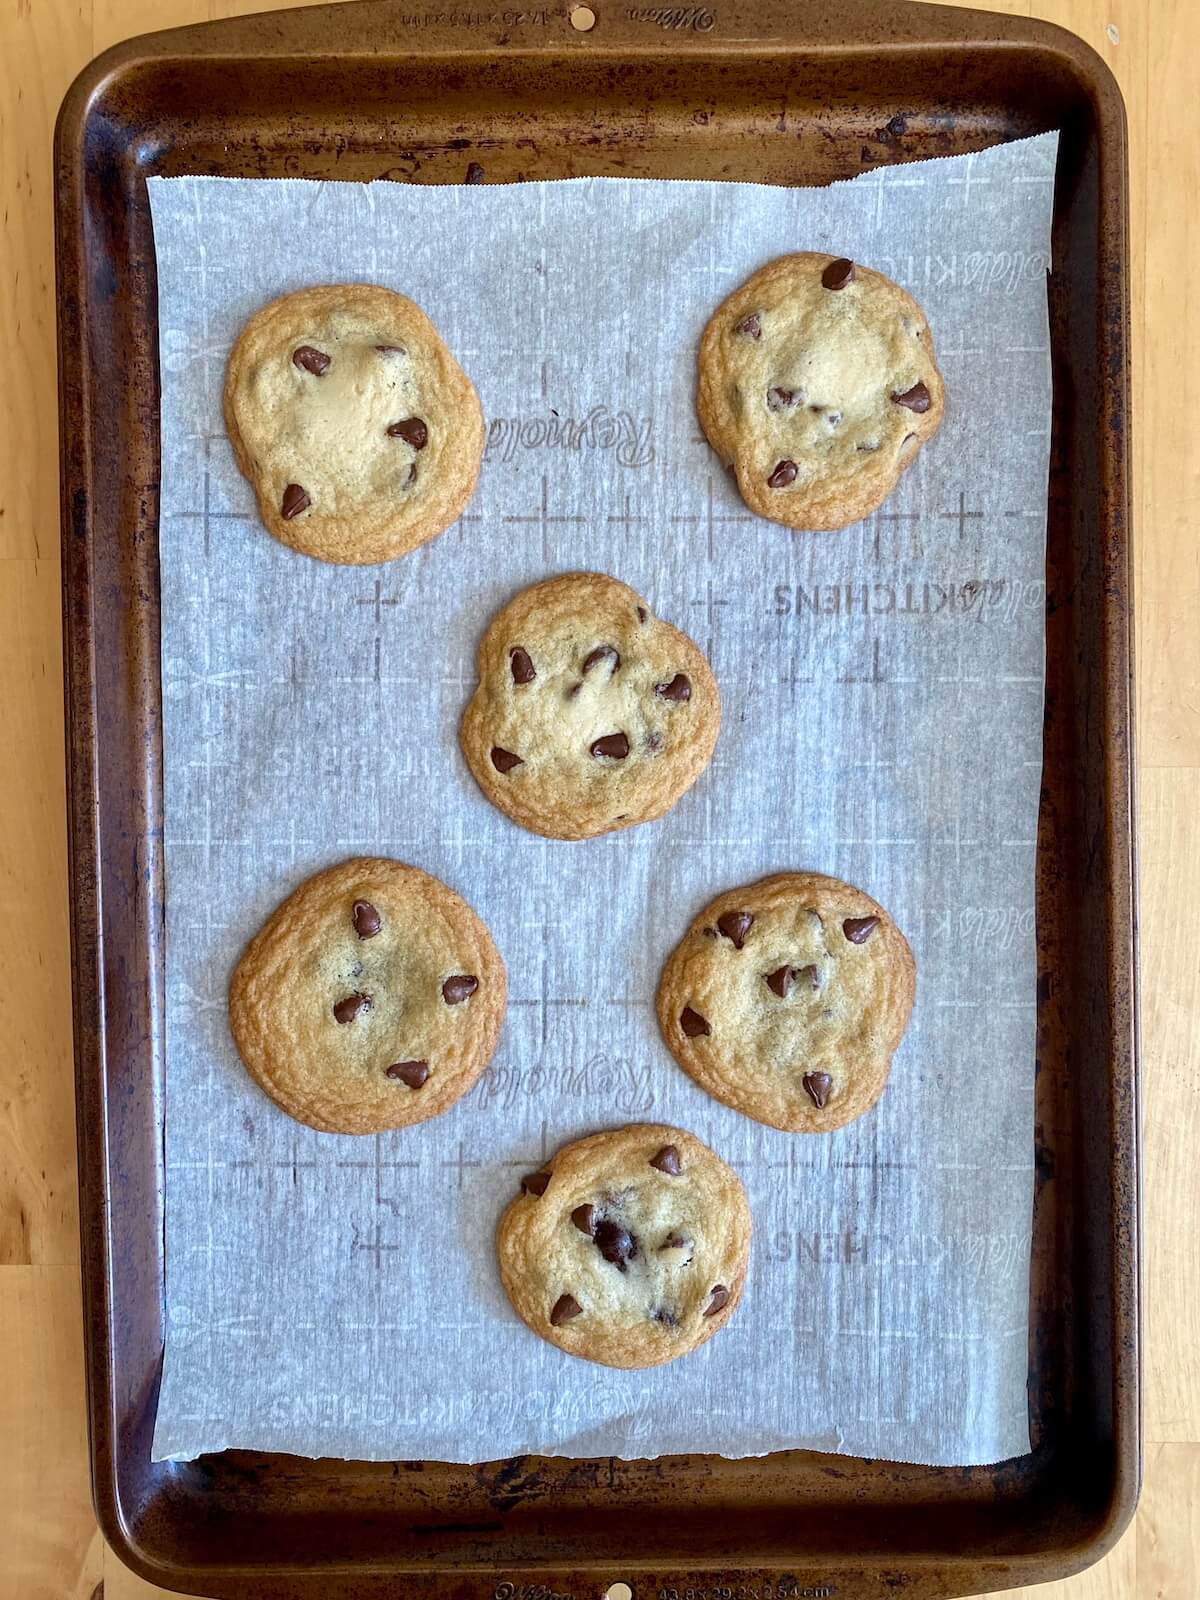 A parchment-lined baking sheet with baked chocolate filled cookies.